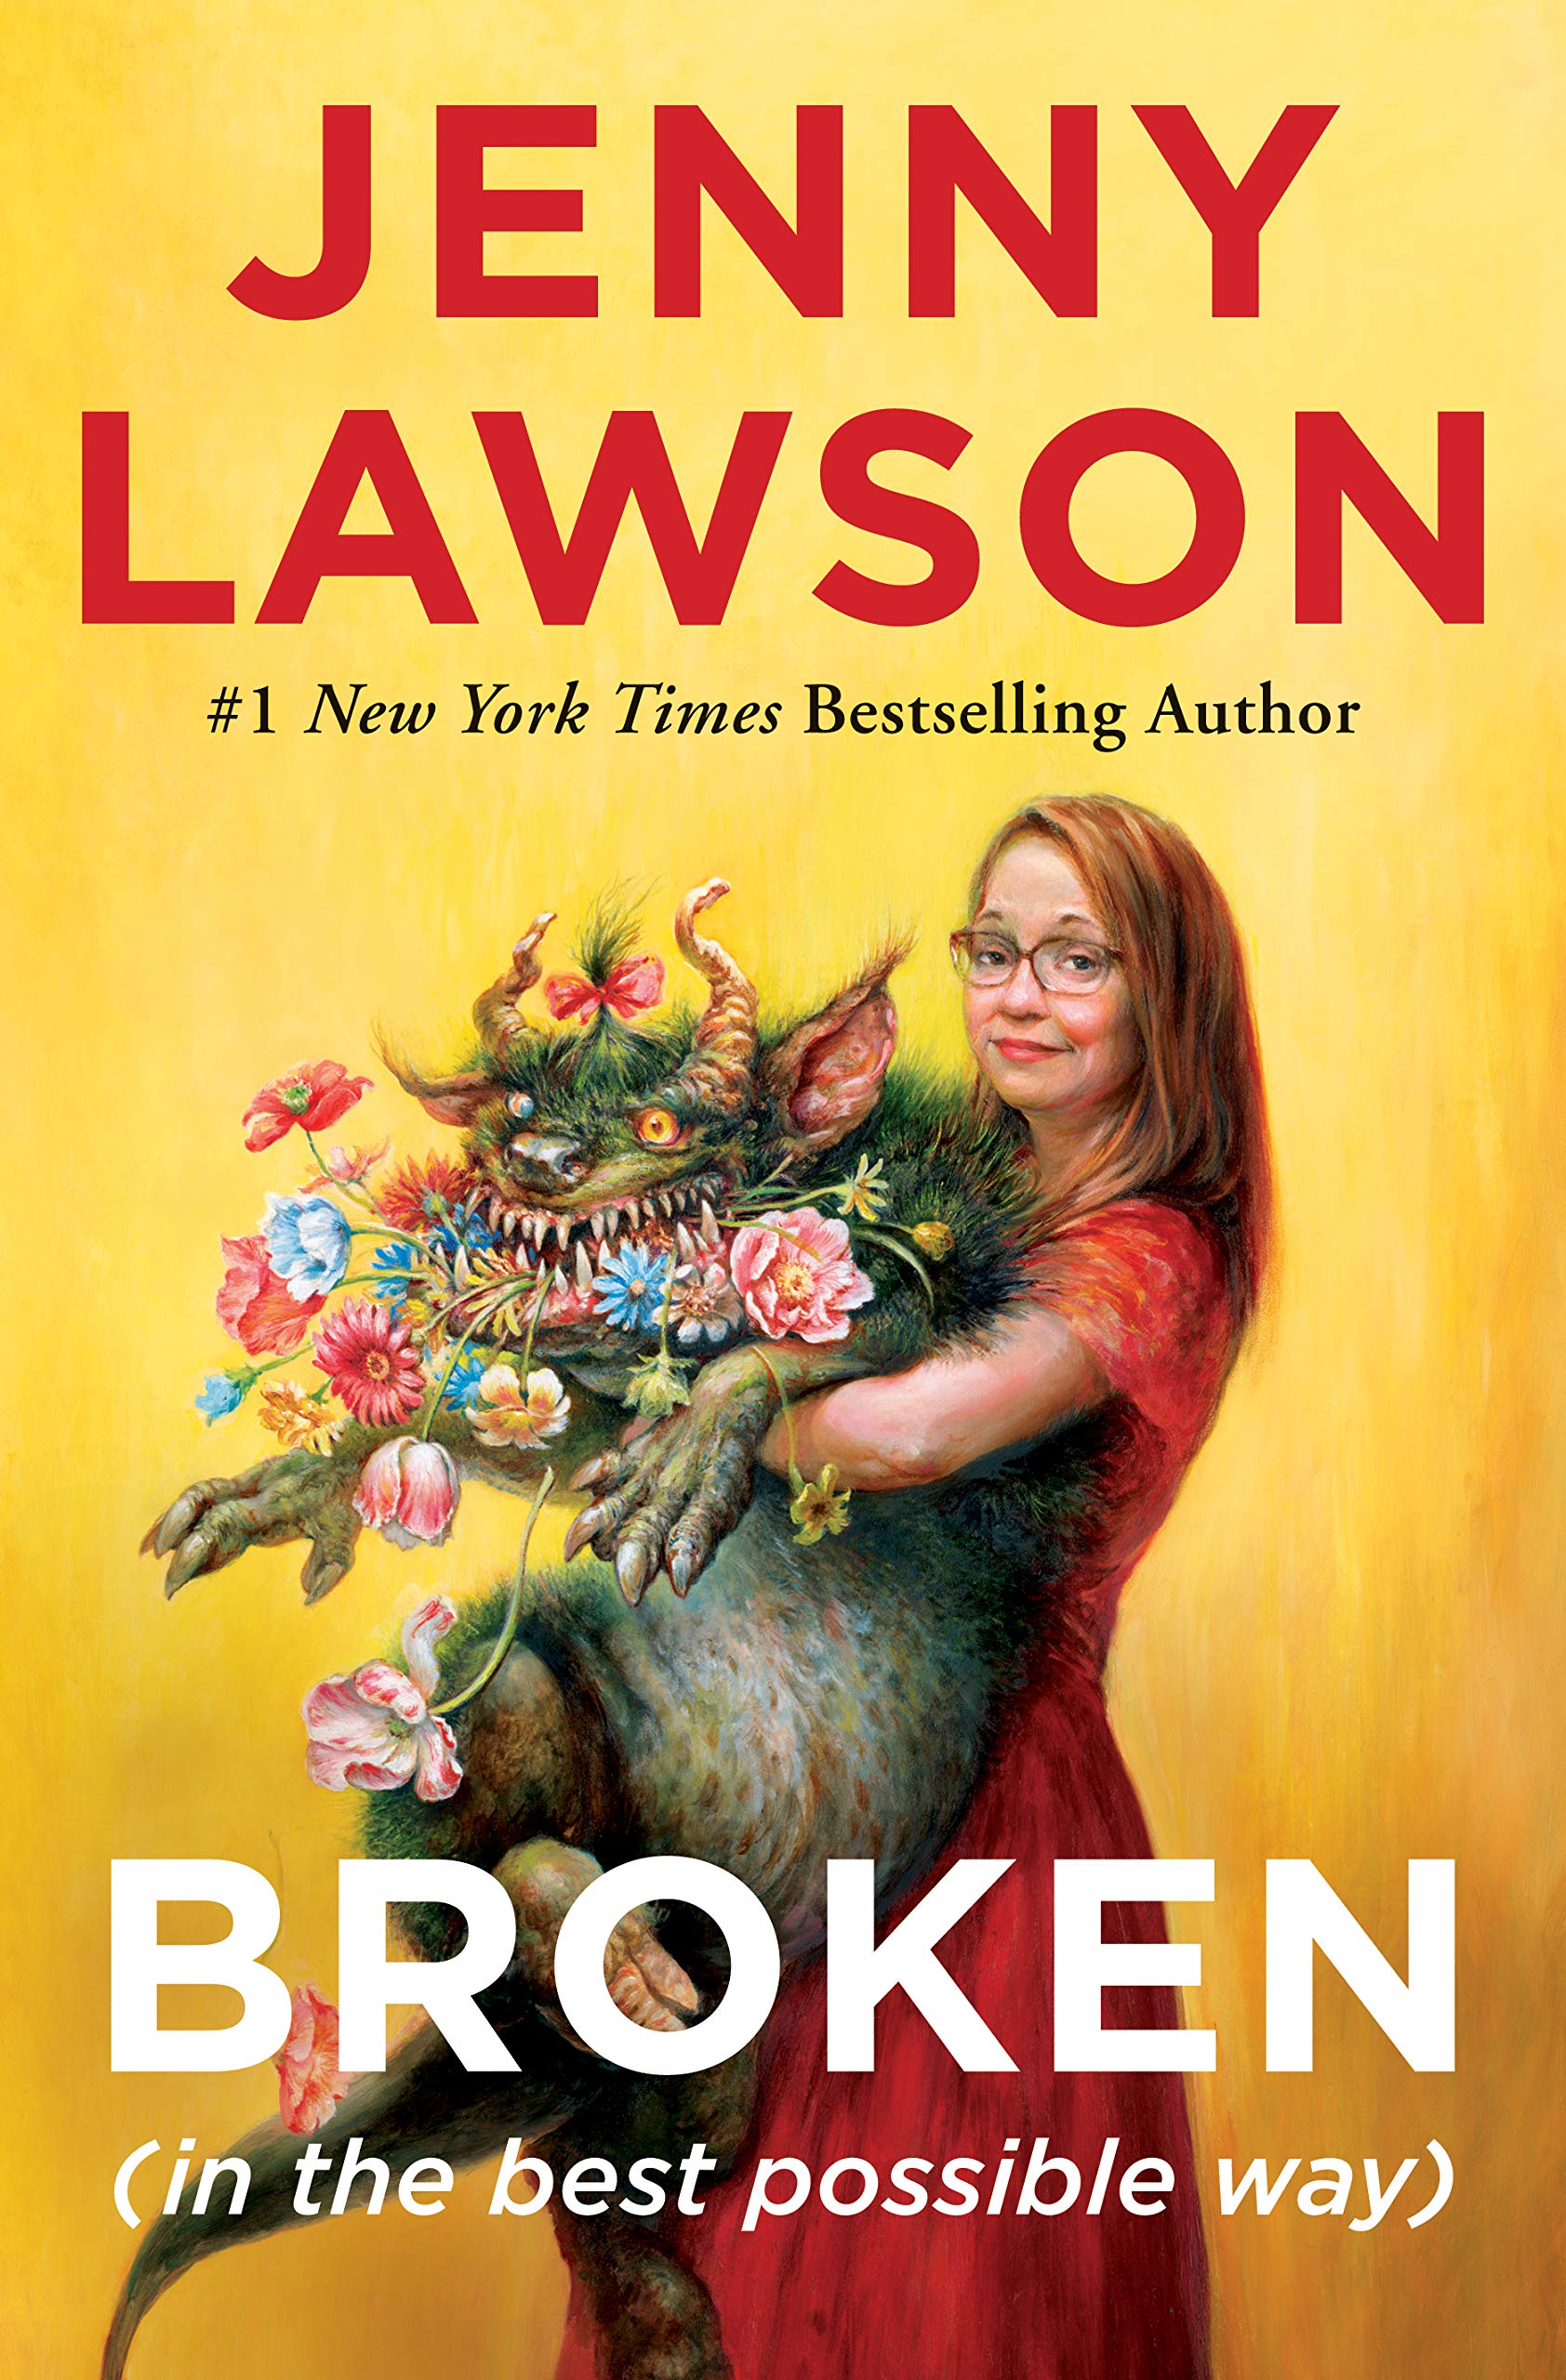 7. Broken (In the Best Possible Way) by Jenny Lawson